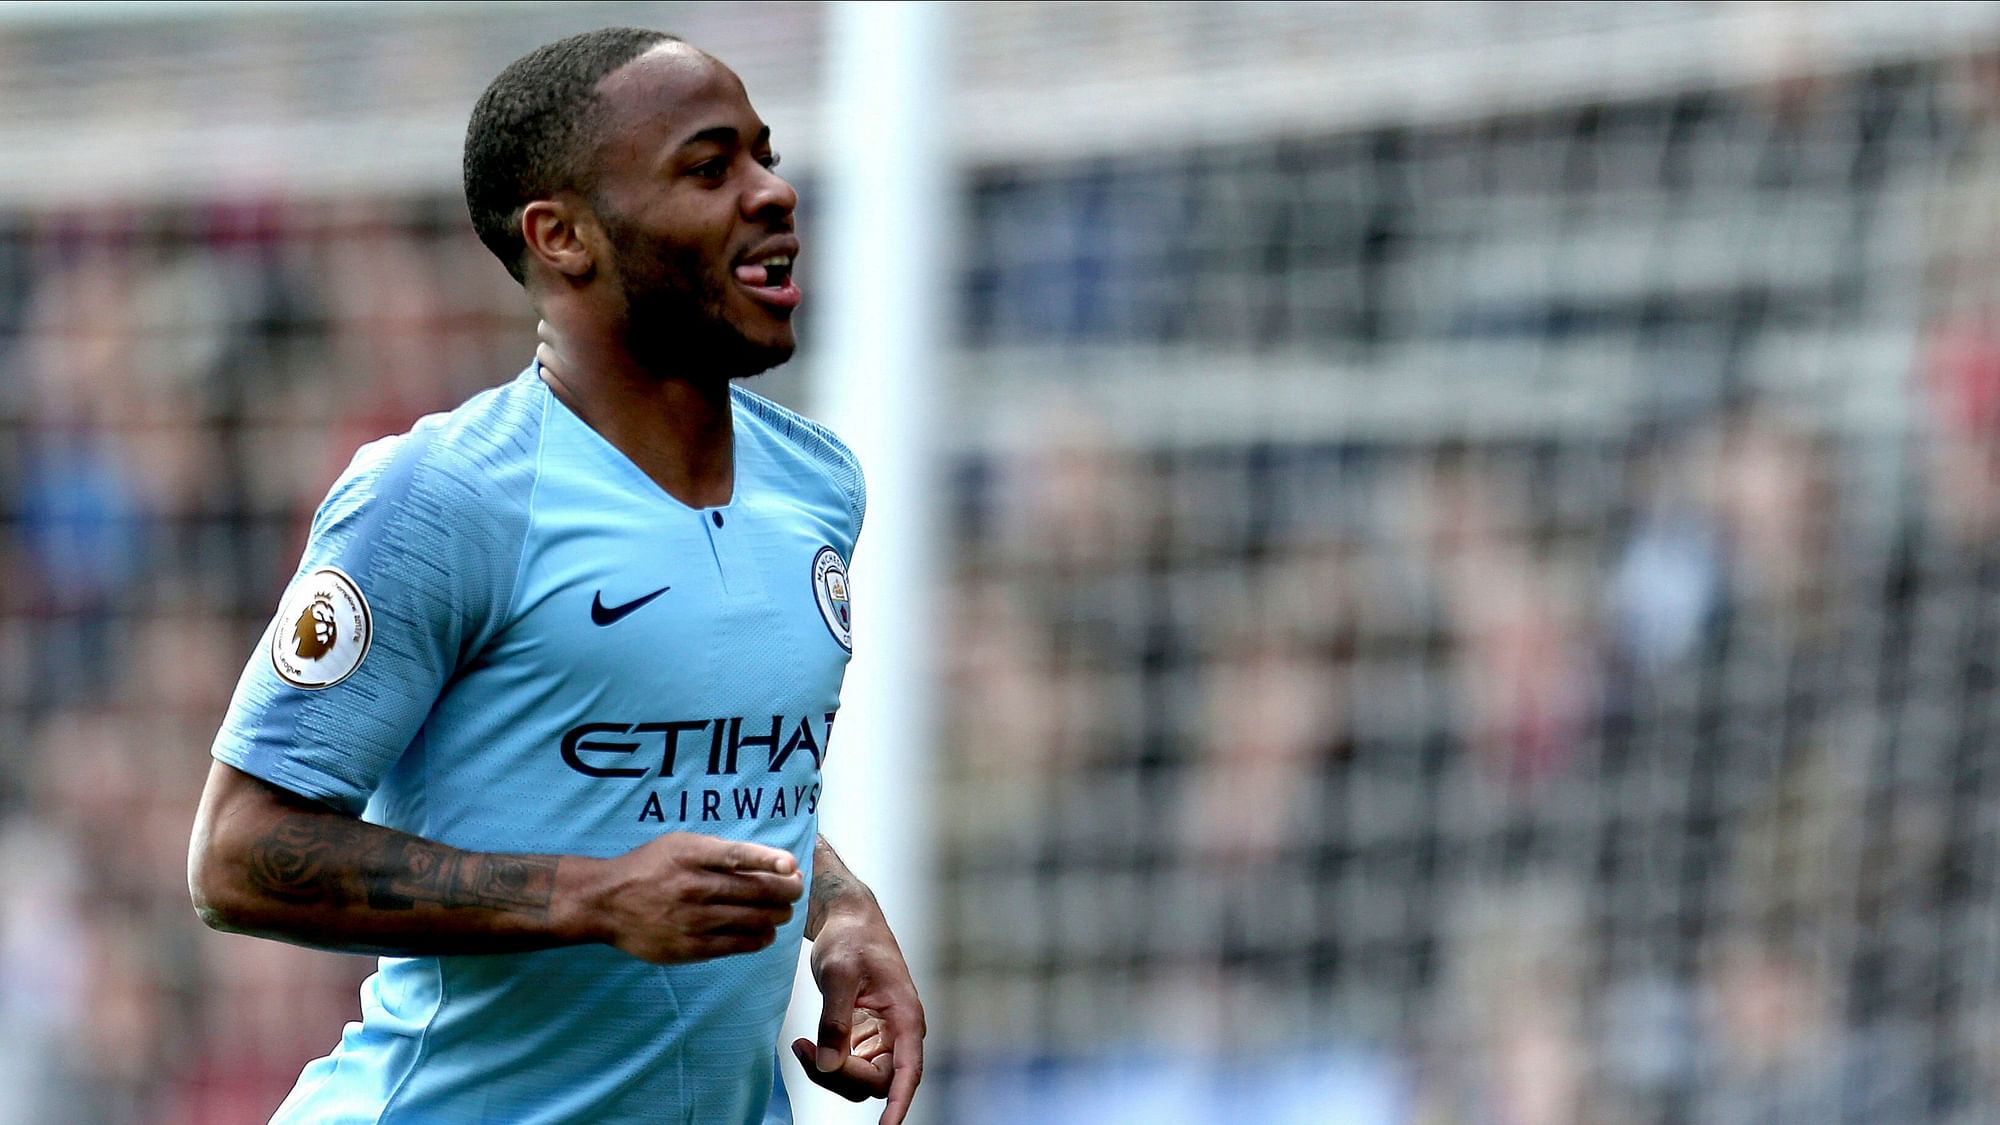 Manchester City’s Raheem Sterling celebrates scoring his side’s second goal of the game during the Premier League match at Selhurst Park, London.&nbsp;